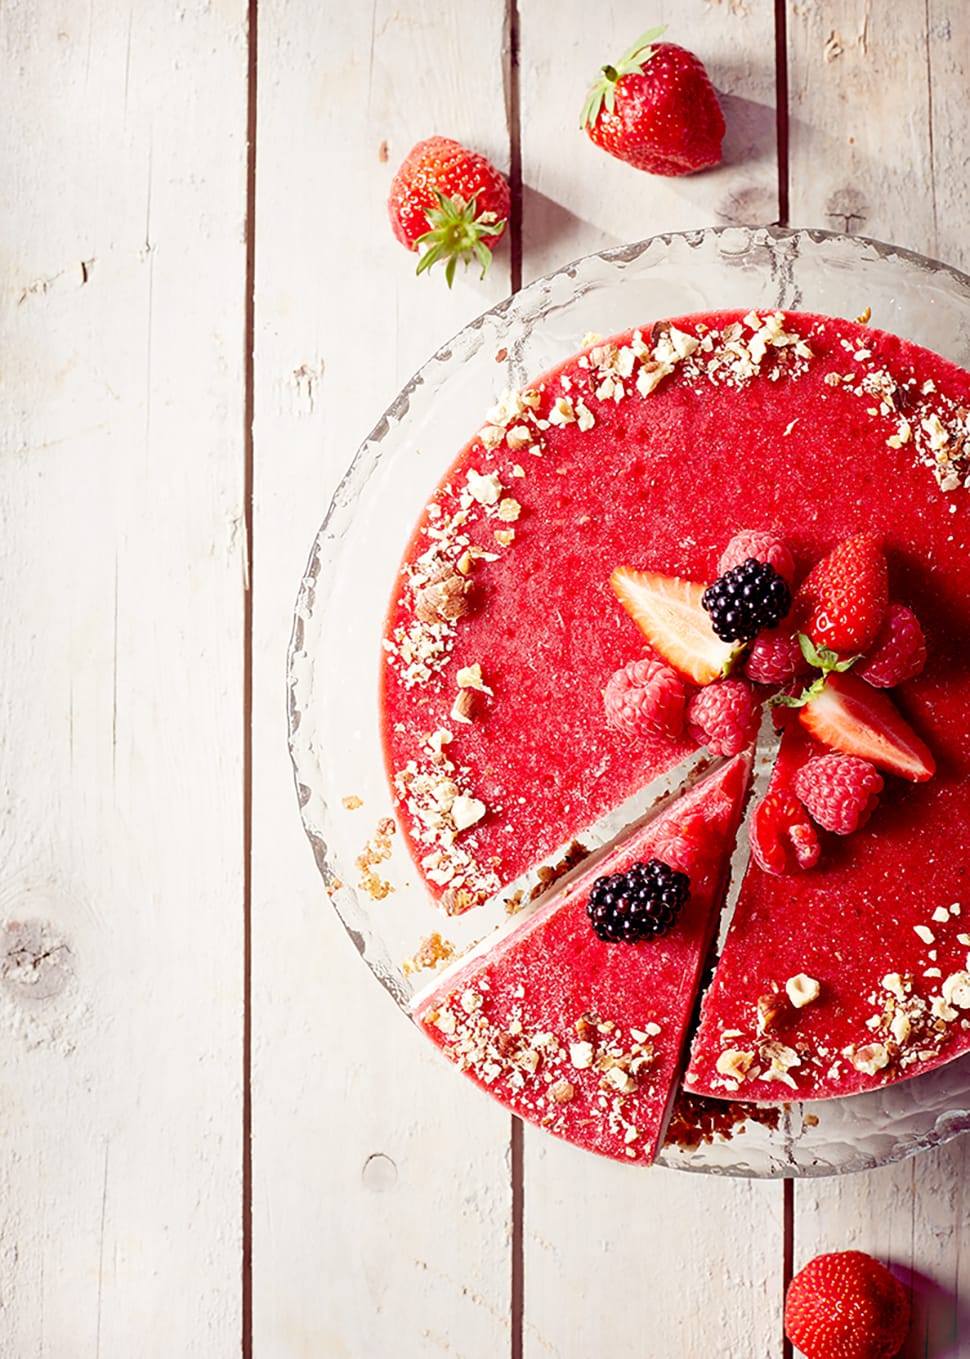 Cheese cake aux fruits rouges